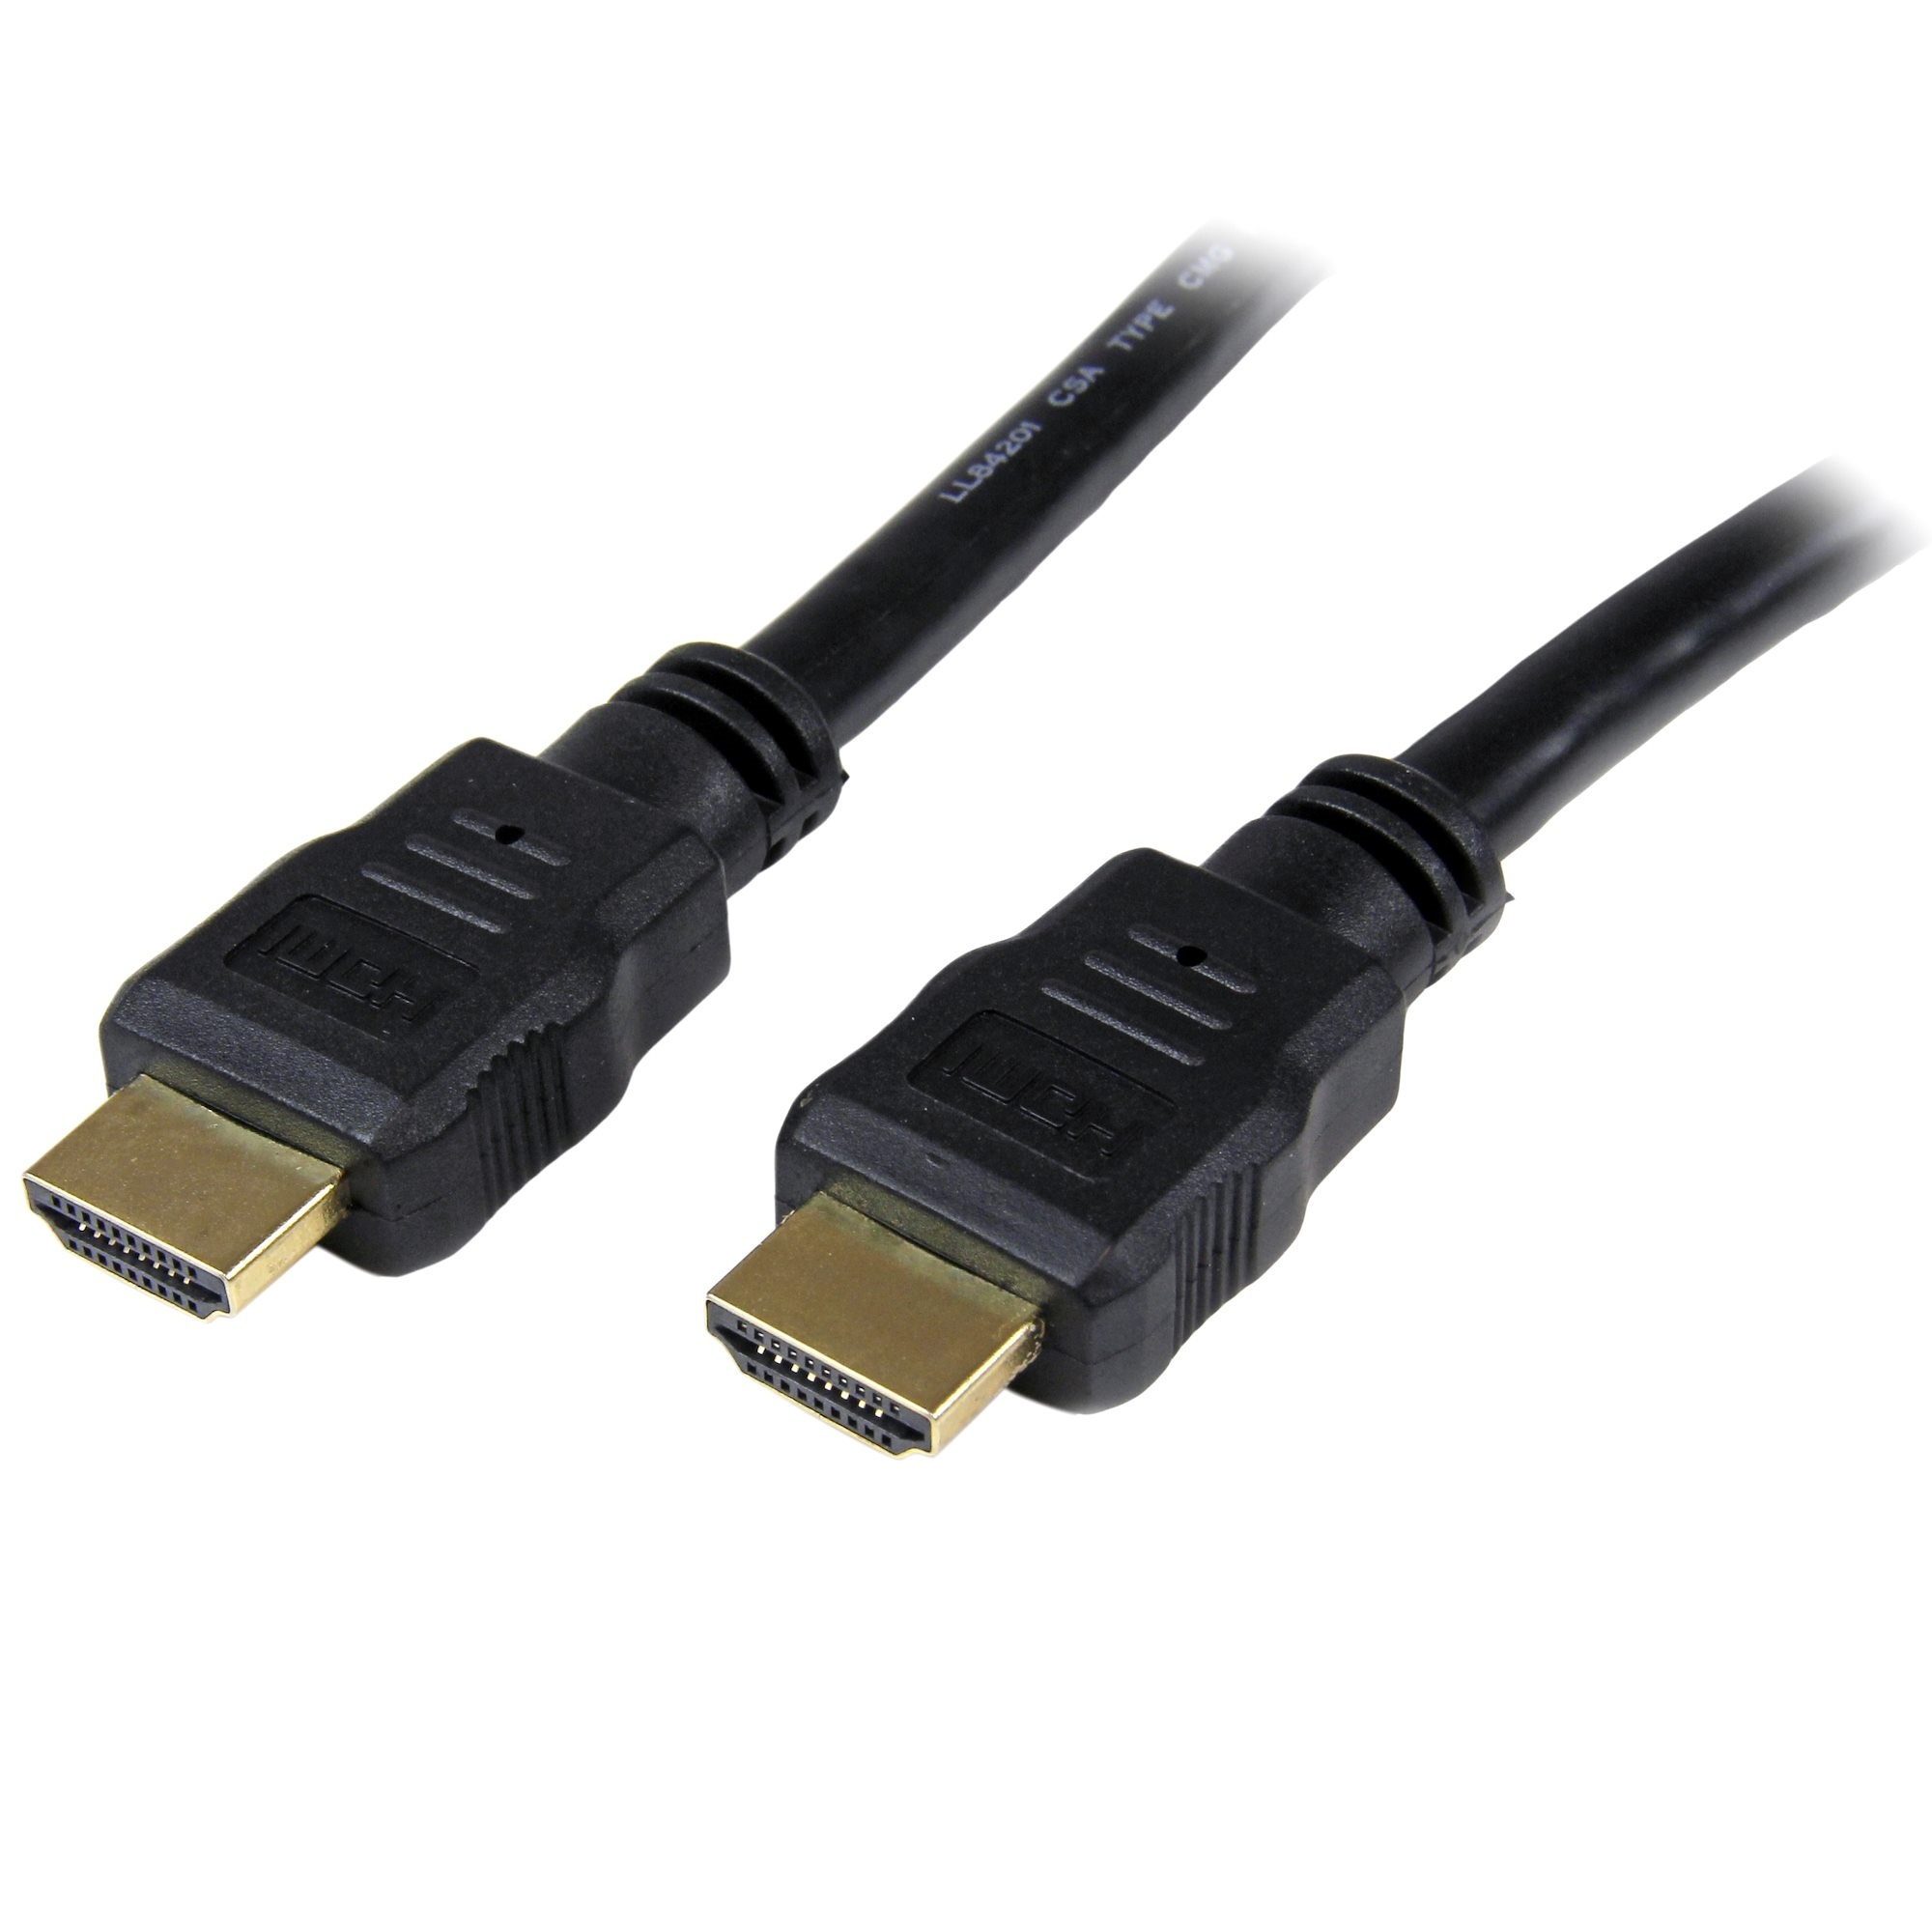 StarTech High Speed HDMI Cable Ultra HD (0.5m)